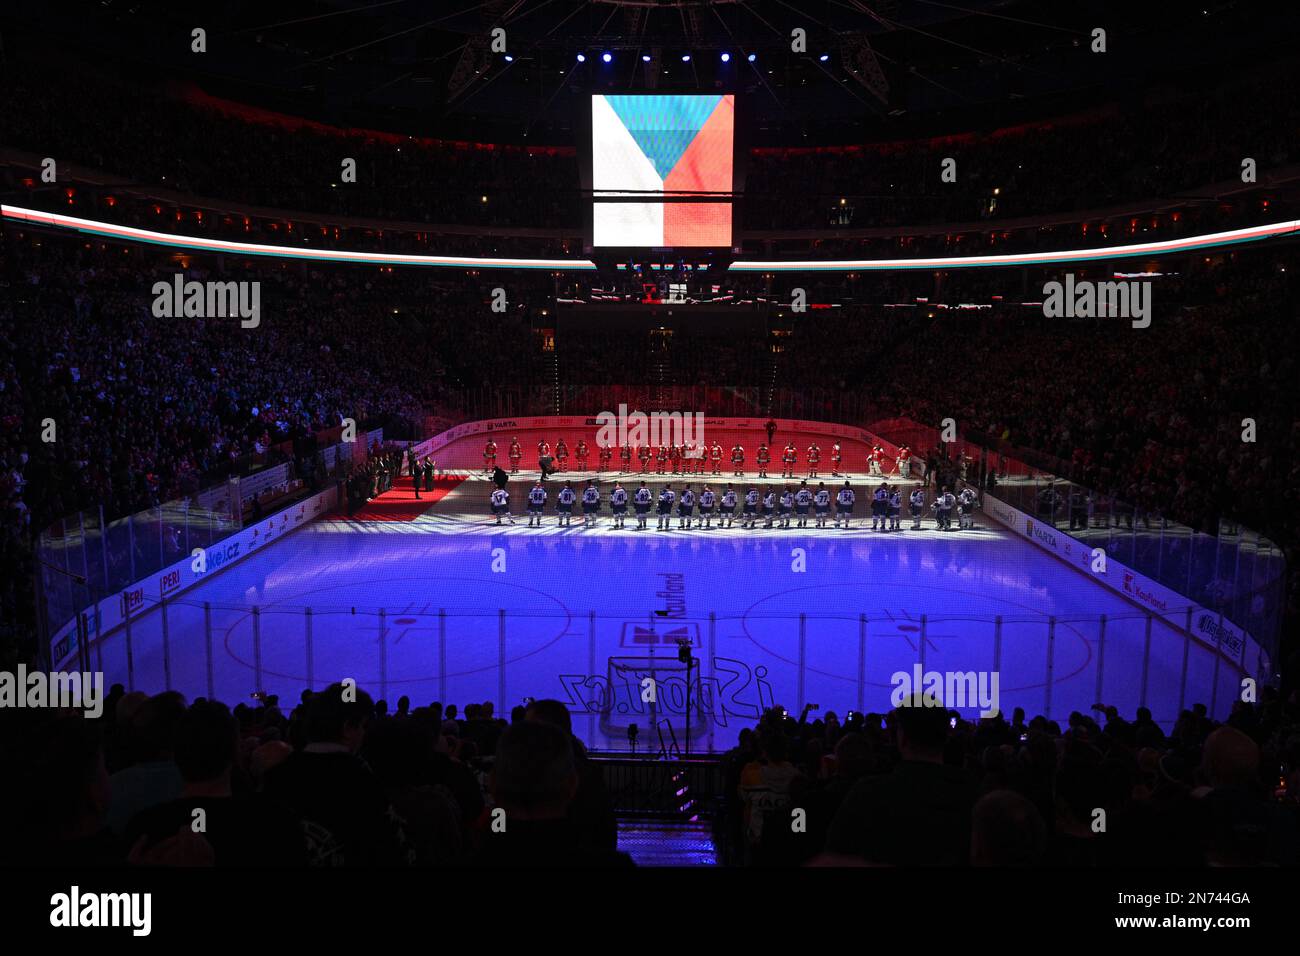 Prague, Czech Republic. 10th Feb, 2023. The hockey match of legends Czech Republic vs Slovakia in Prague, Czech Republic, February 10, 2023. The match is part of the celebration of the 25th anniversary of the Czech team's victory at the 1998 Winter Olympic Games in Nagano. Credit: Michal Kamaryt/CTK Photo/Alamy Live News Stock Photo